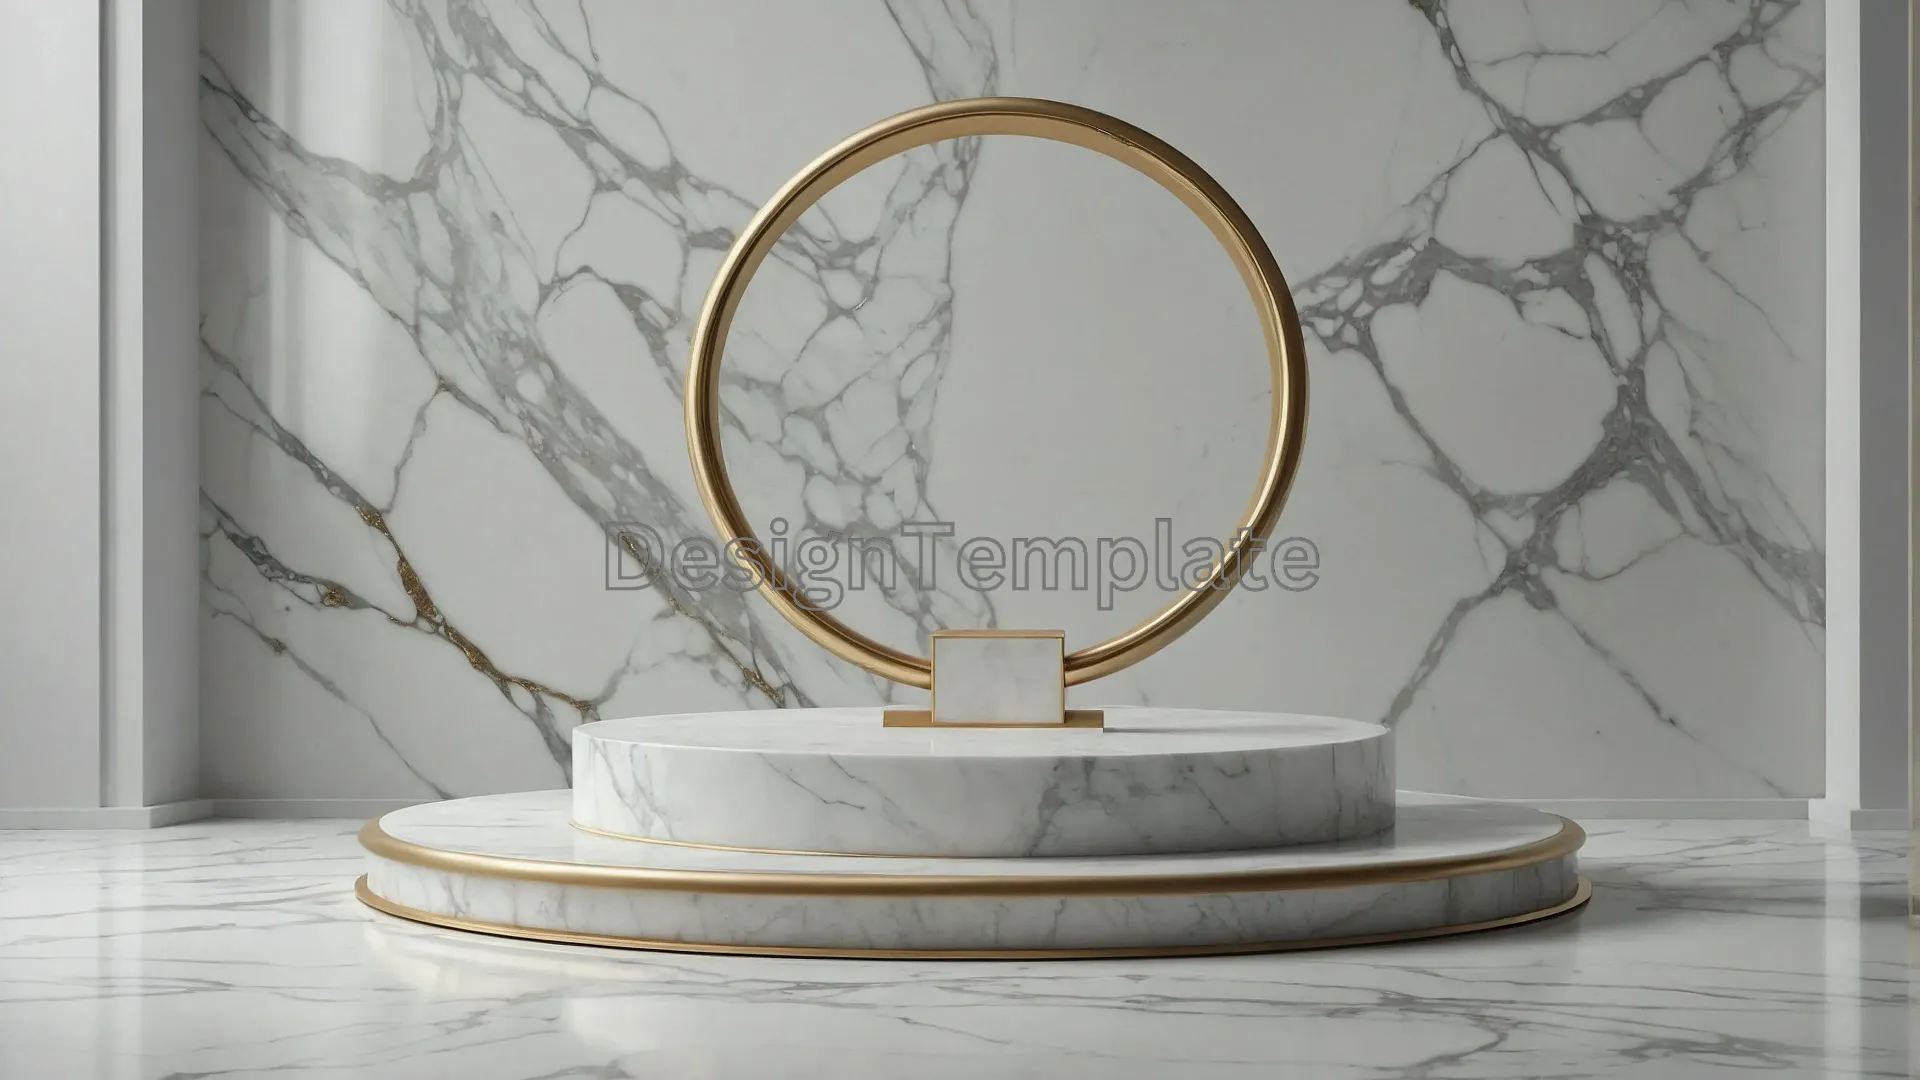 Contemporary Gold Frame Mirror on Striped Marble